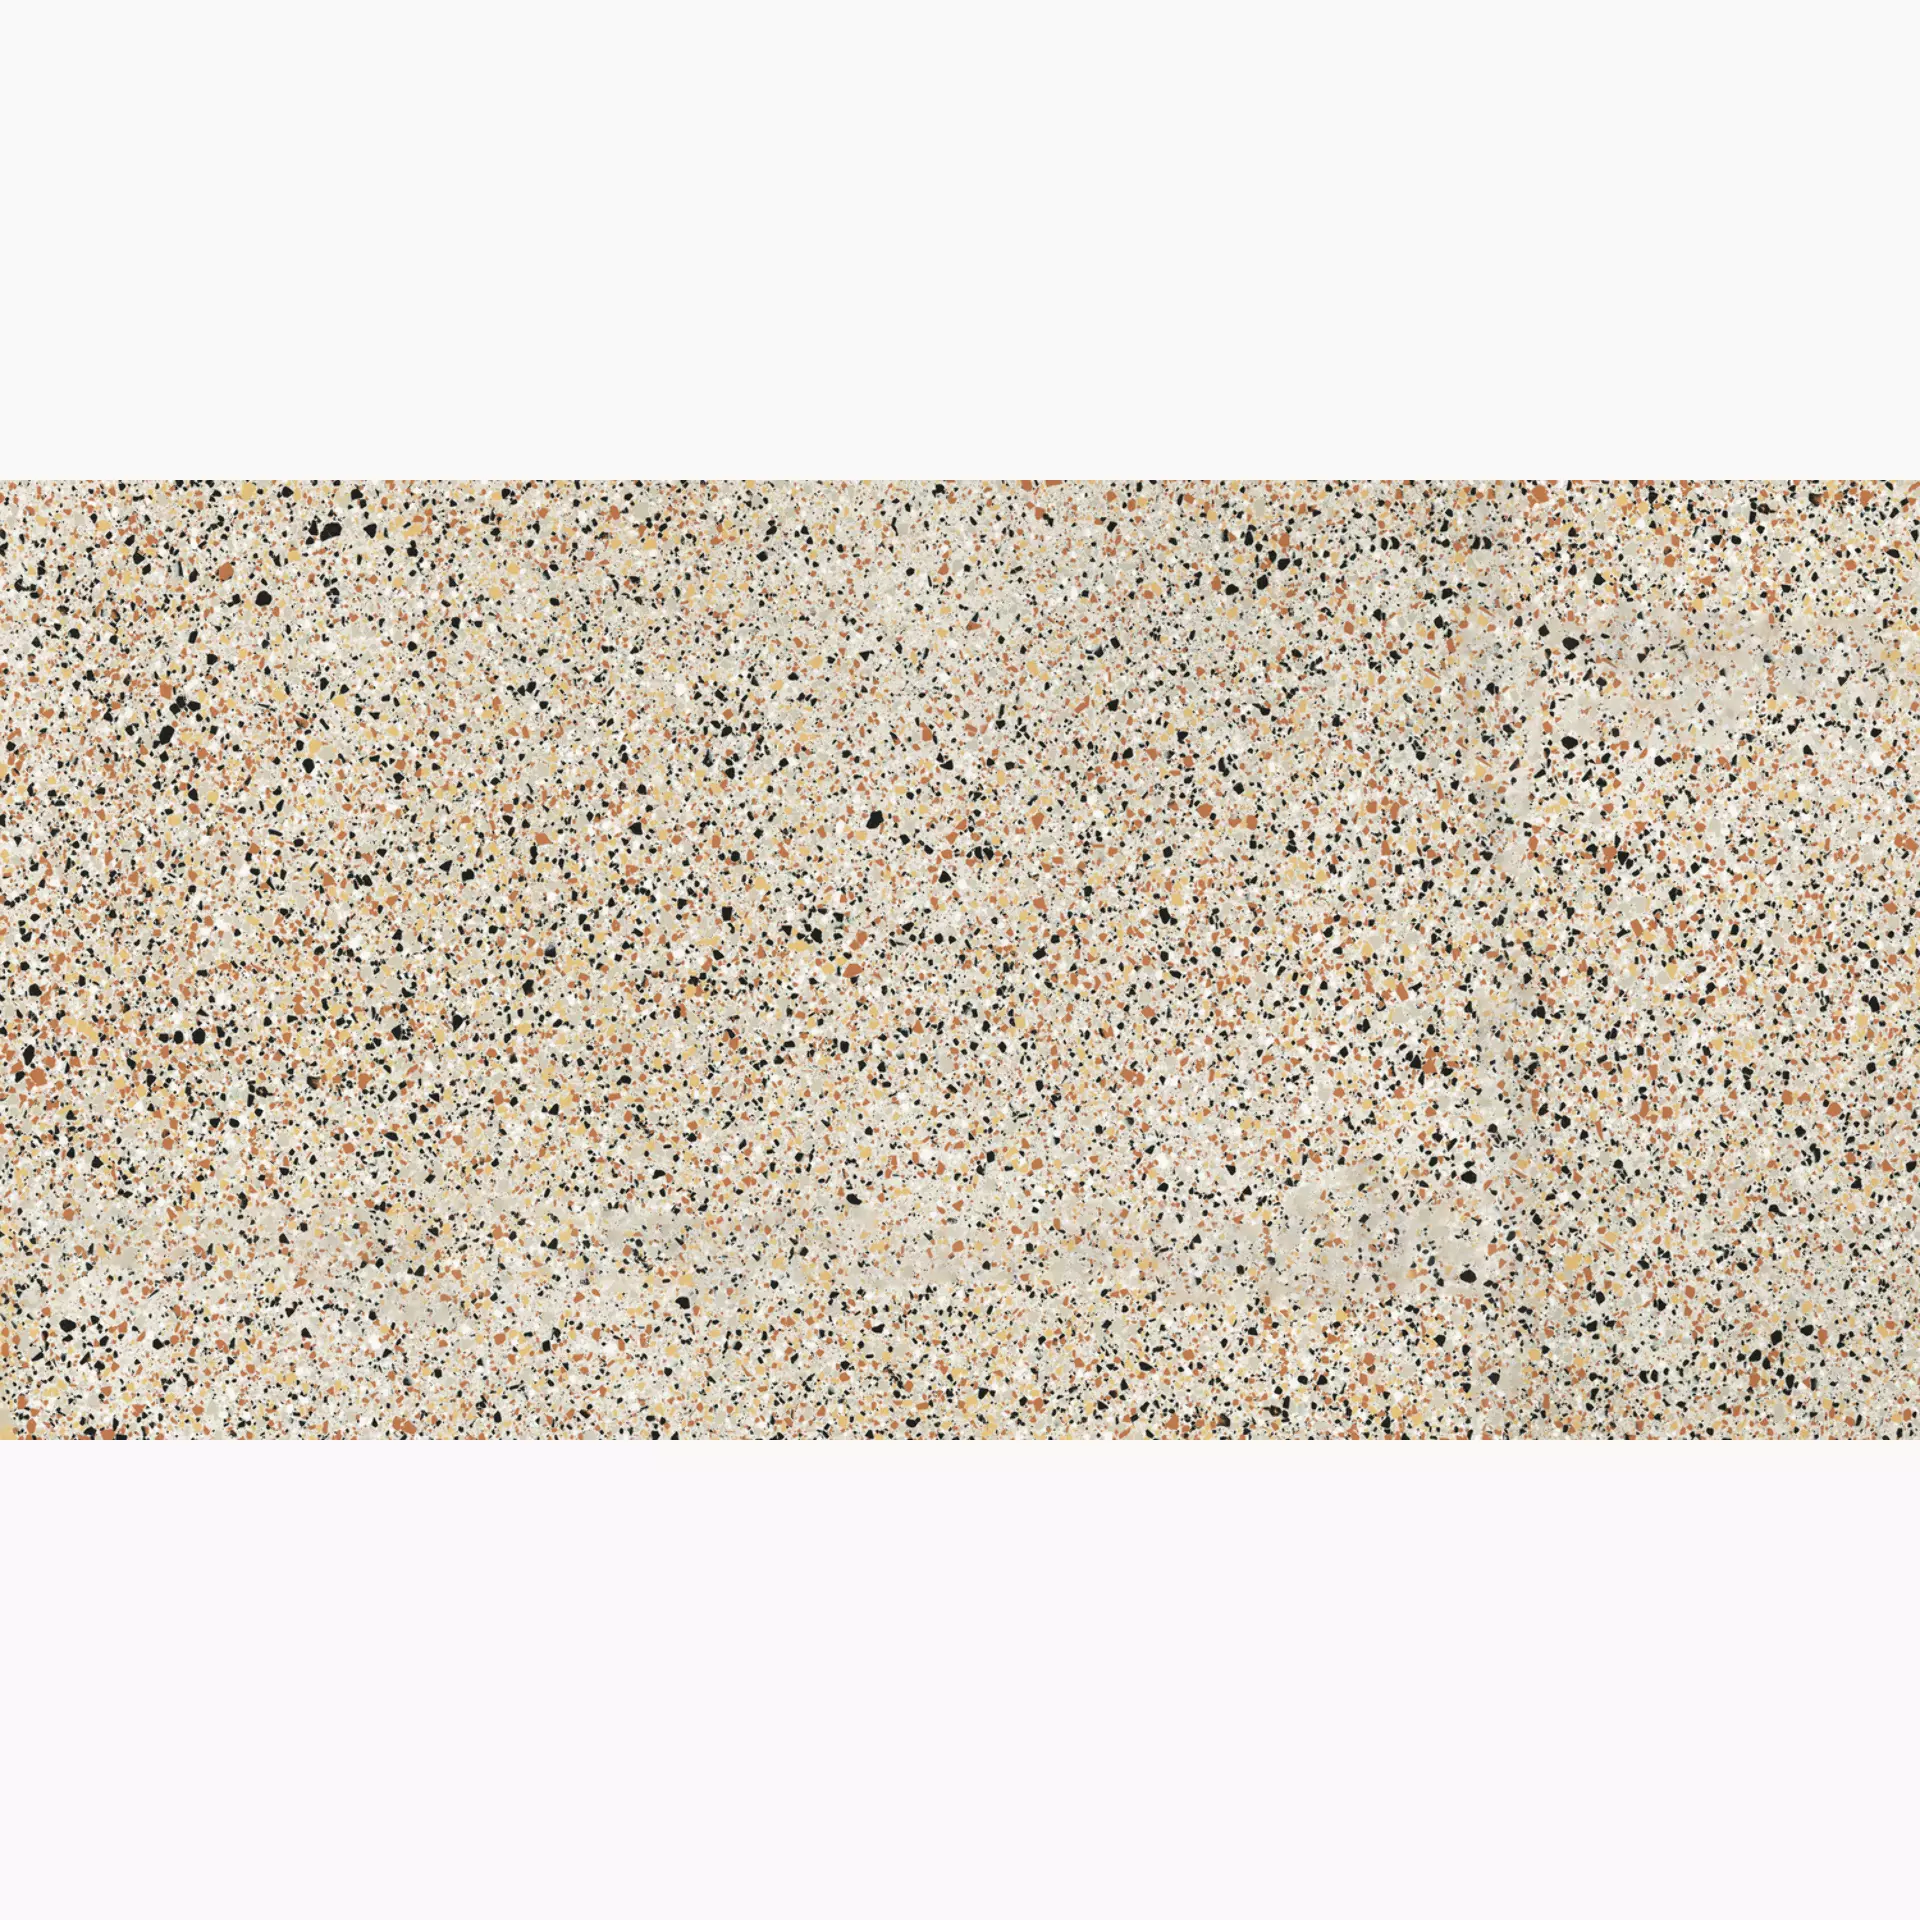 FMG Rialto Ivory Naturale P175424 75x150cm rectified 10mm